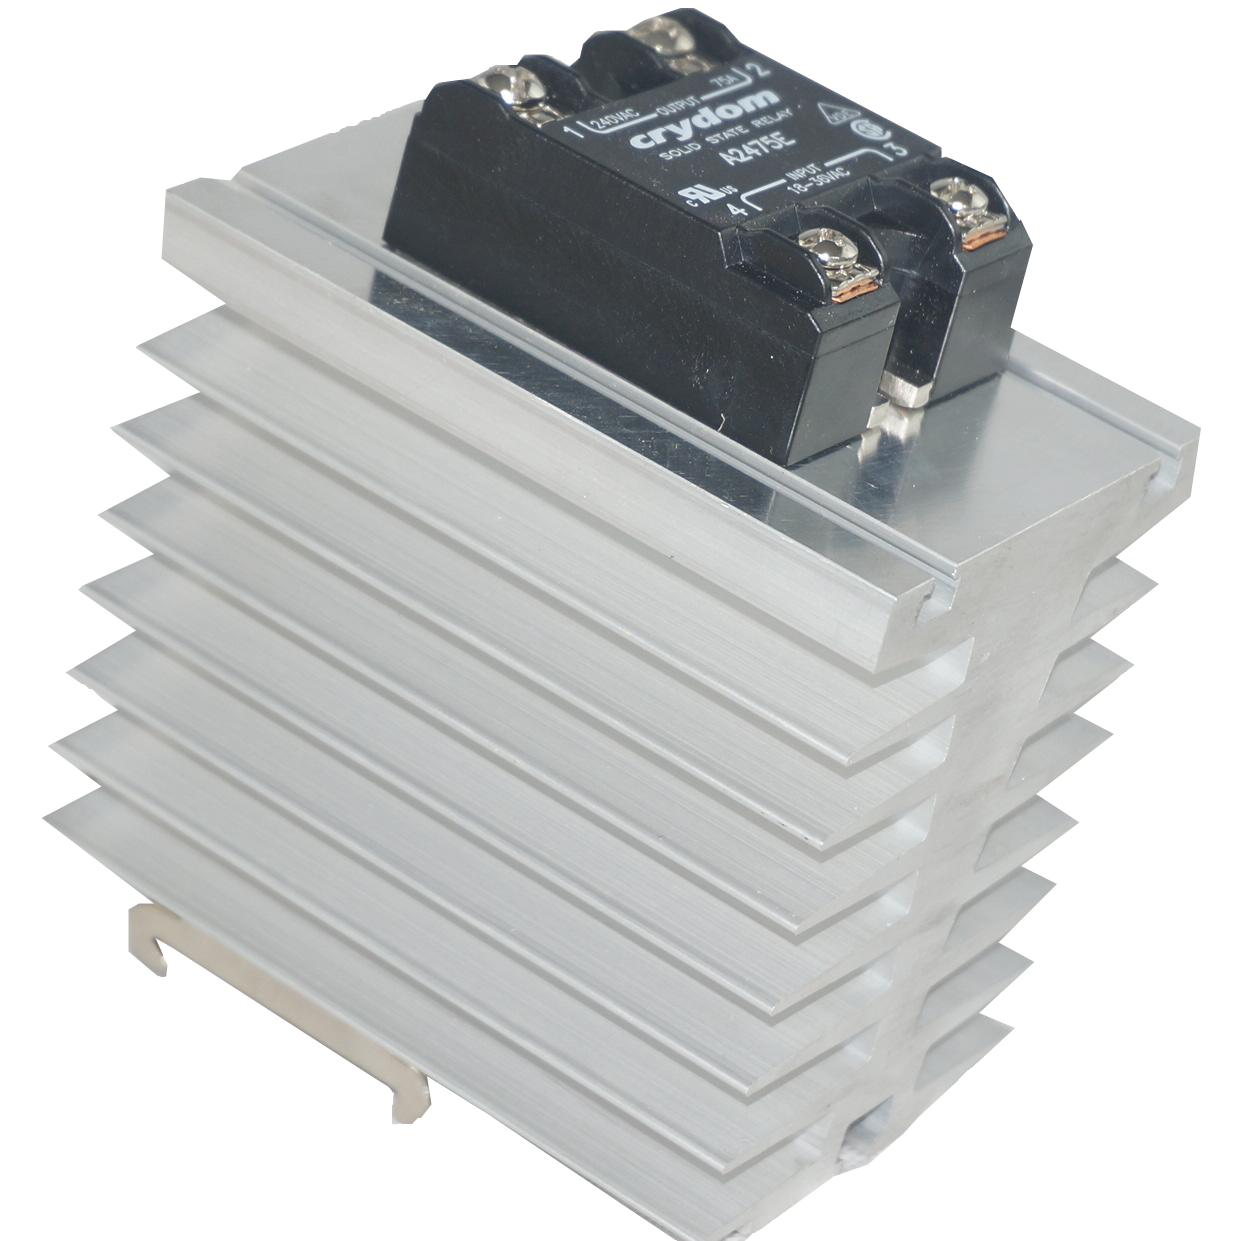 GFIN/100M-DR + HD4850, Din Rail Mount Solid State Relay with Heatsink, 4-32VDC Control Input, 48-660VAC Output, 50 Amps @ 40 Deg C ambient